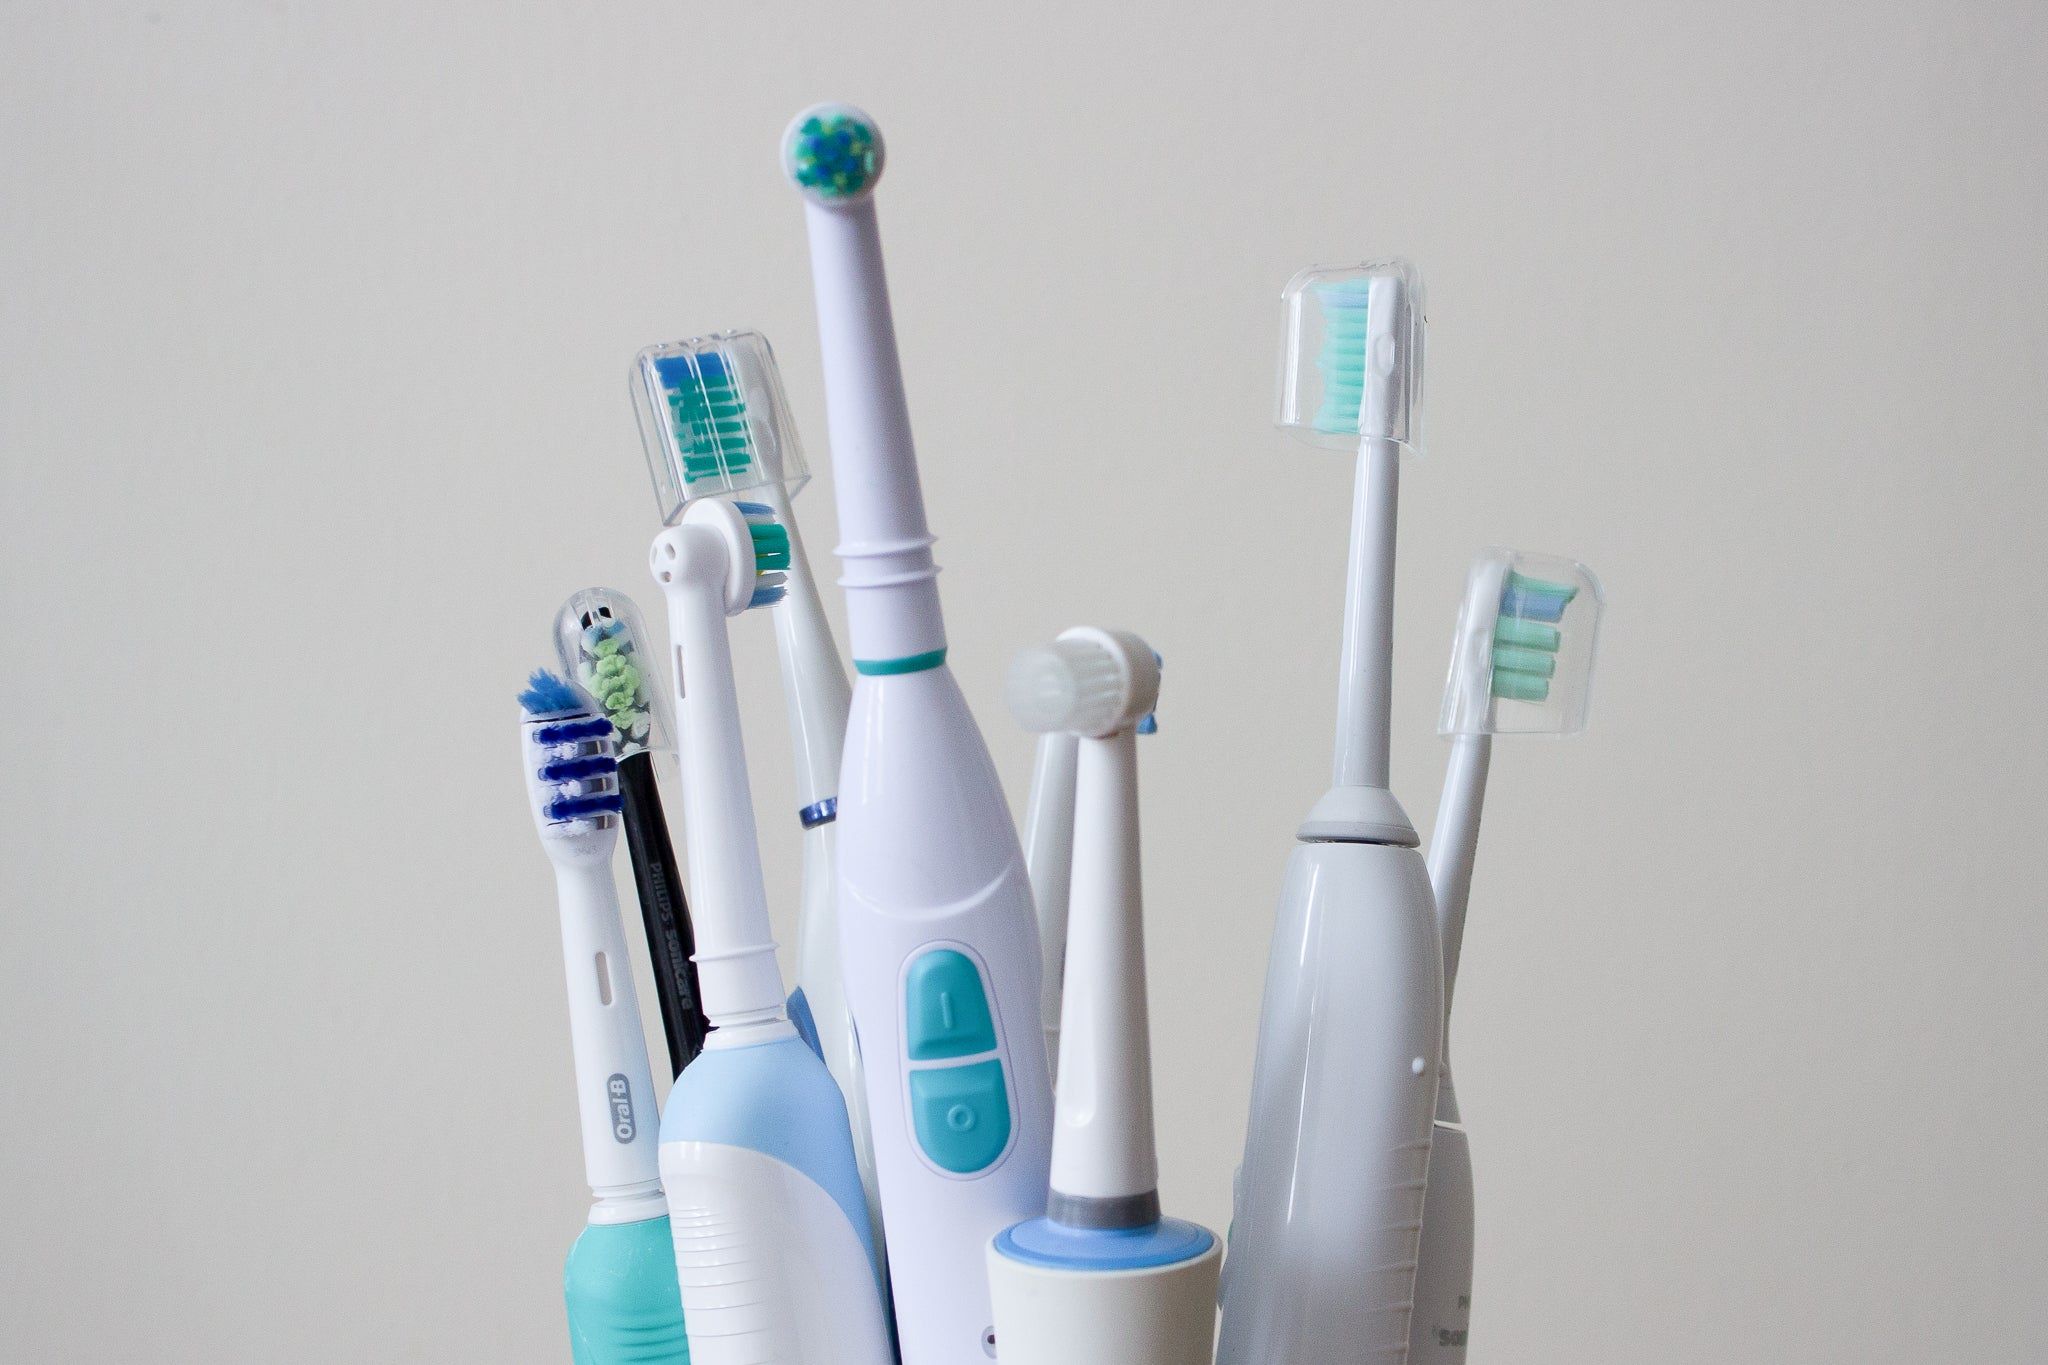 How To Disinfect Toothbrush After Strep